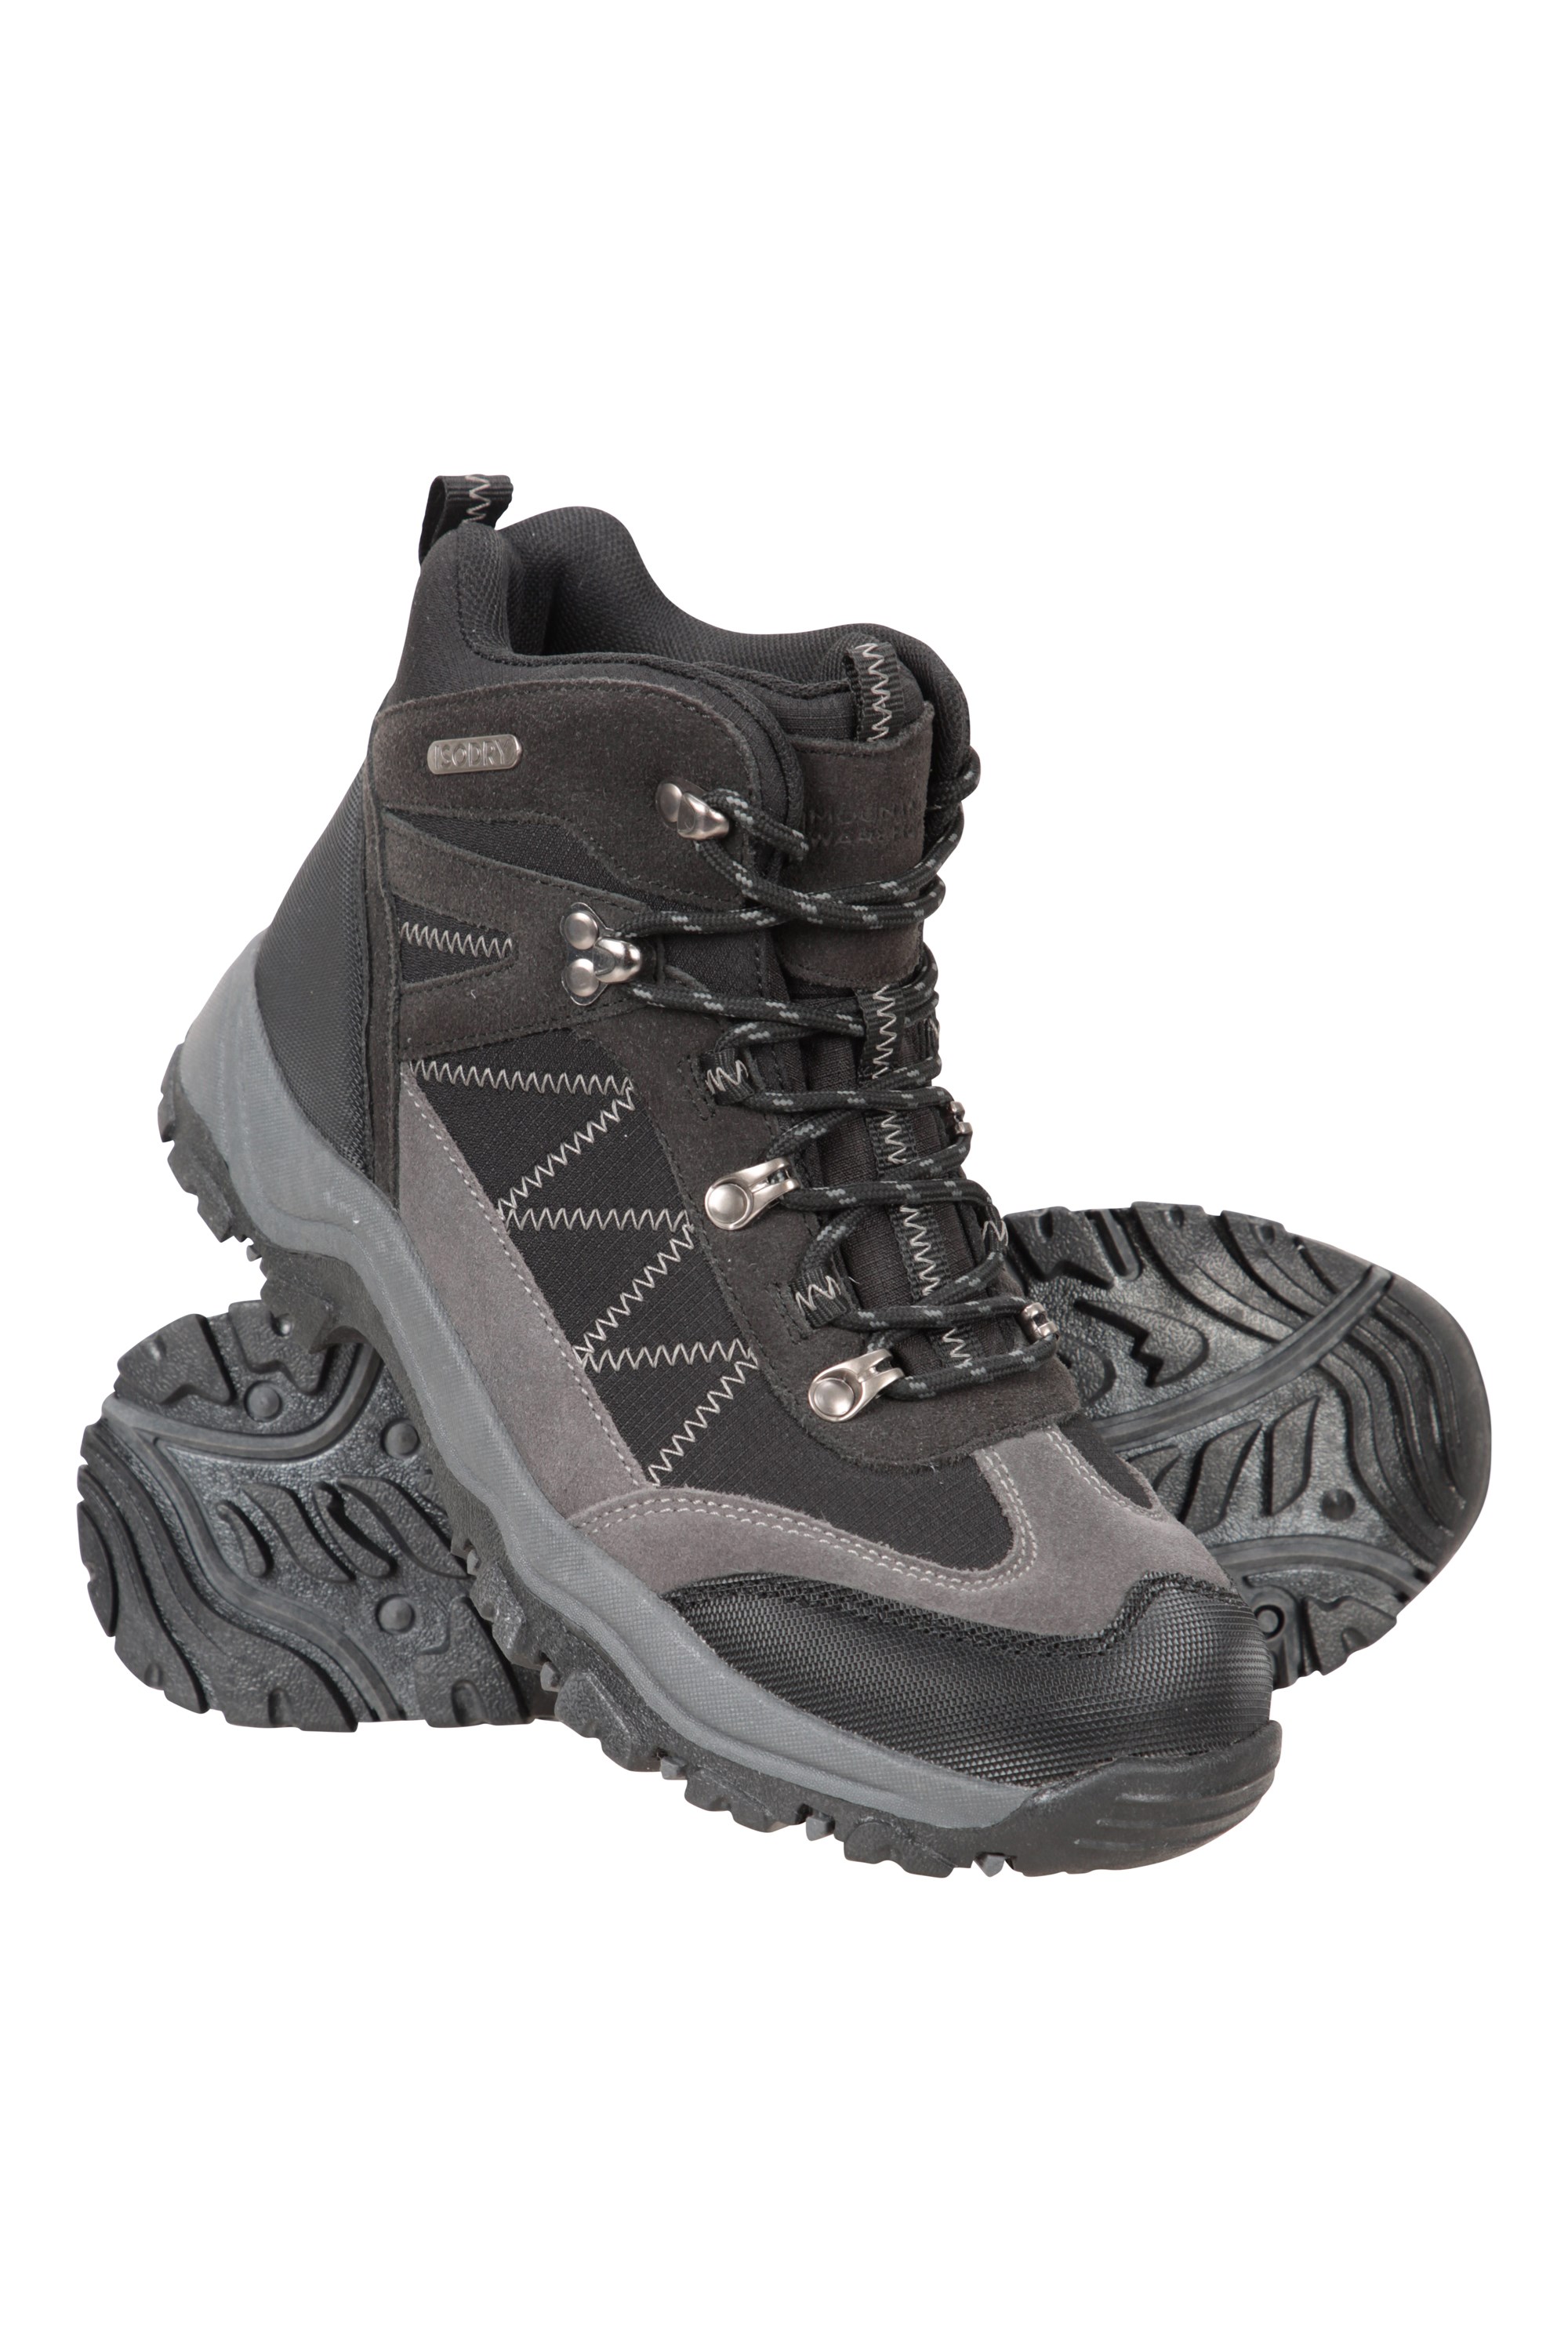 Mountain Warehouse Rapid Womens Waterproof Hiking Boots Ladies Shoes 